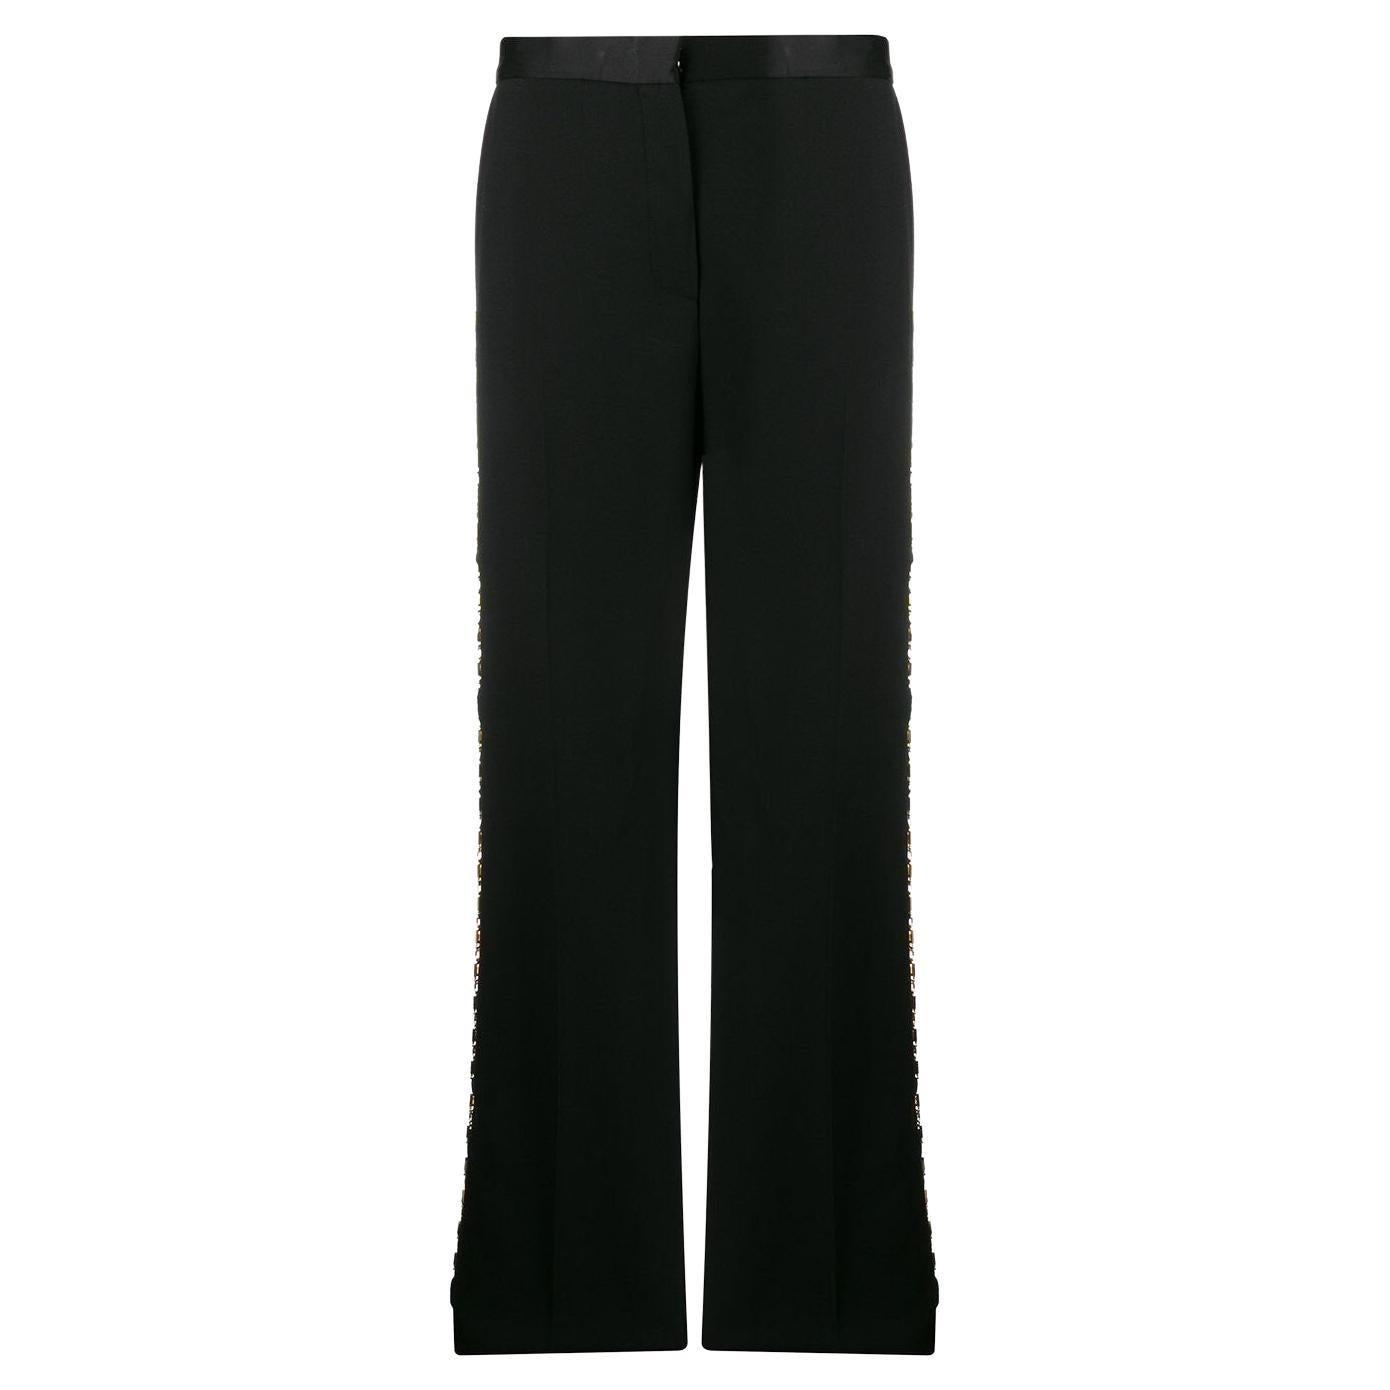 Versace Gold Tone Greca Chain Tailored Black Trousers / Pants Size 38 For Sale